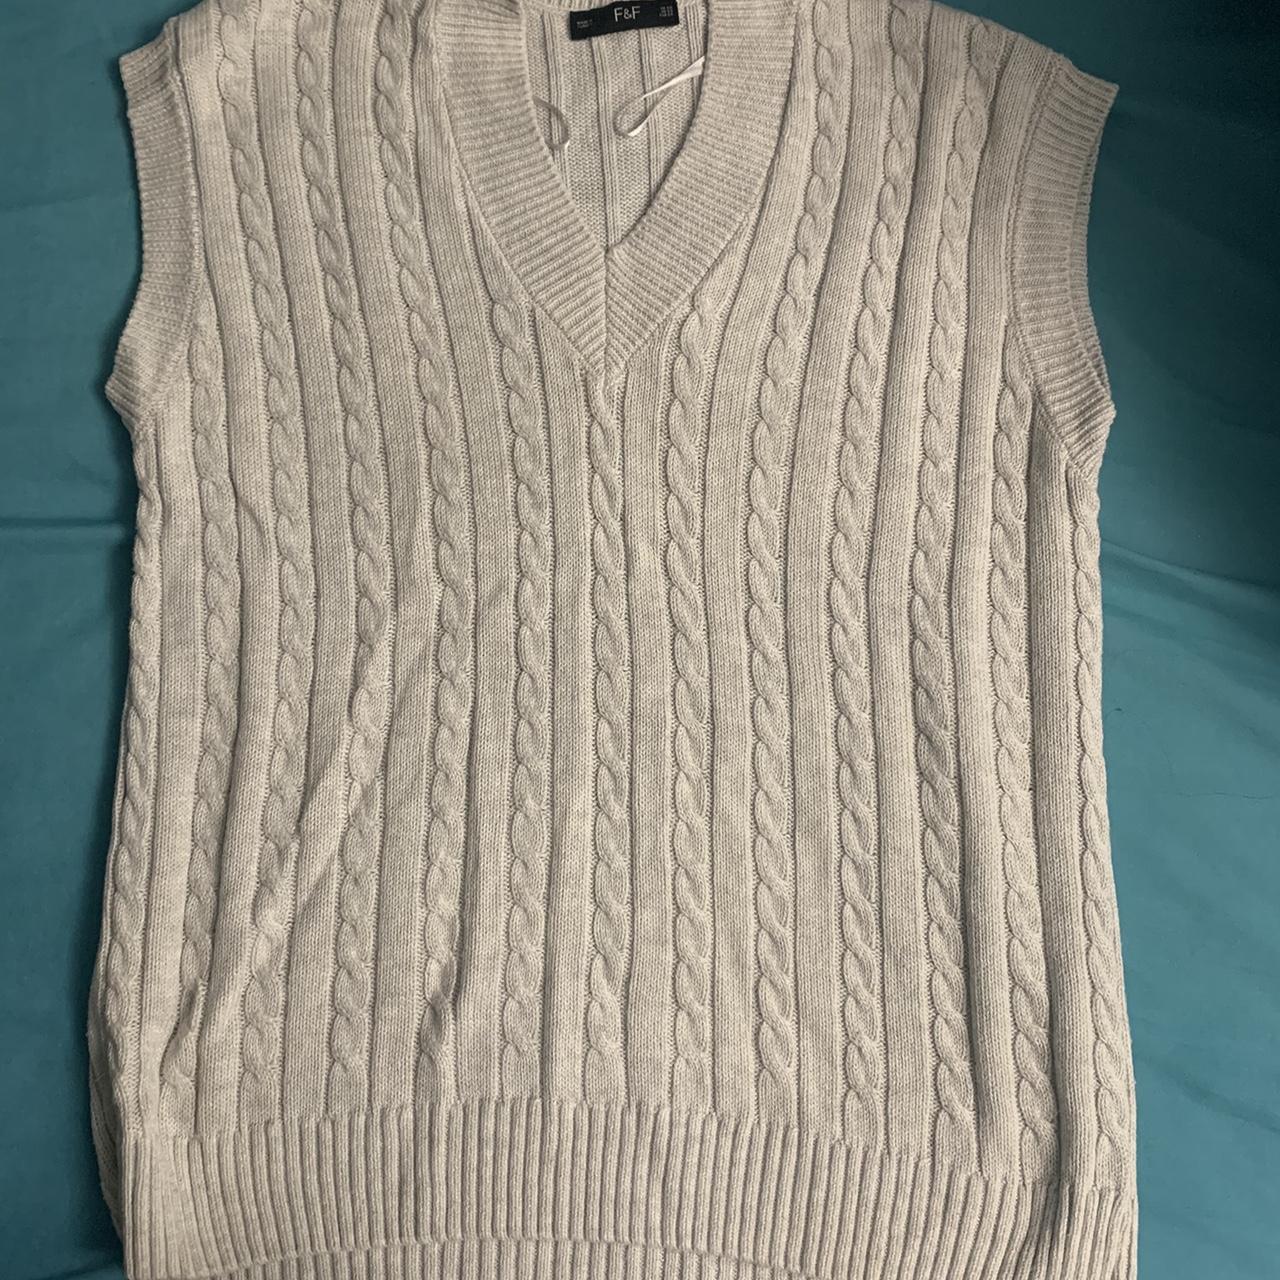 Long sweater vest So cute and perfect for all... - Depop